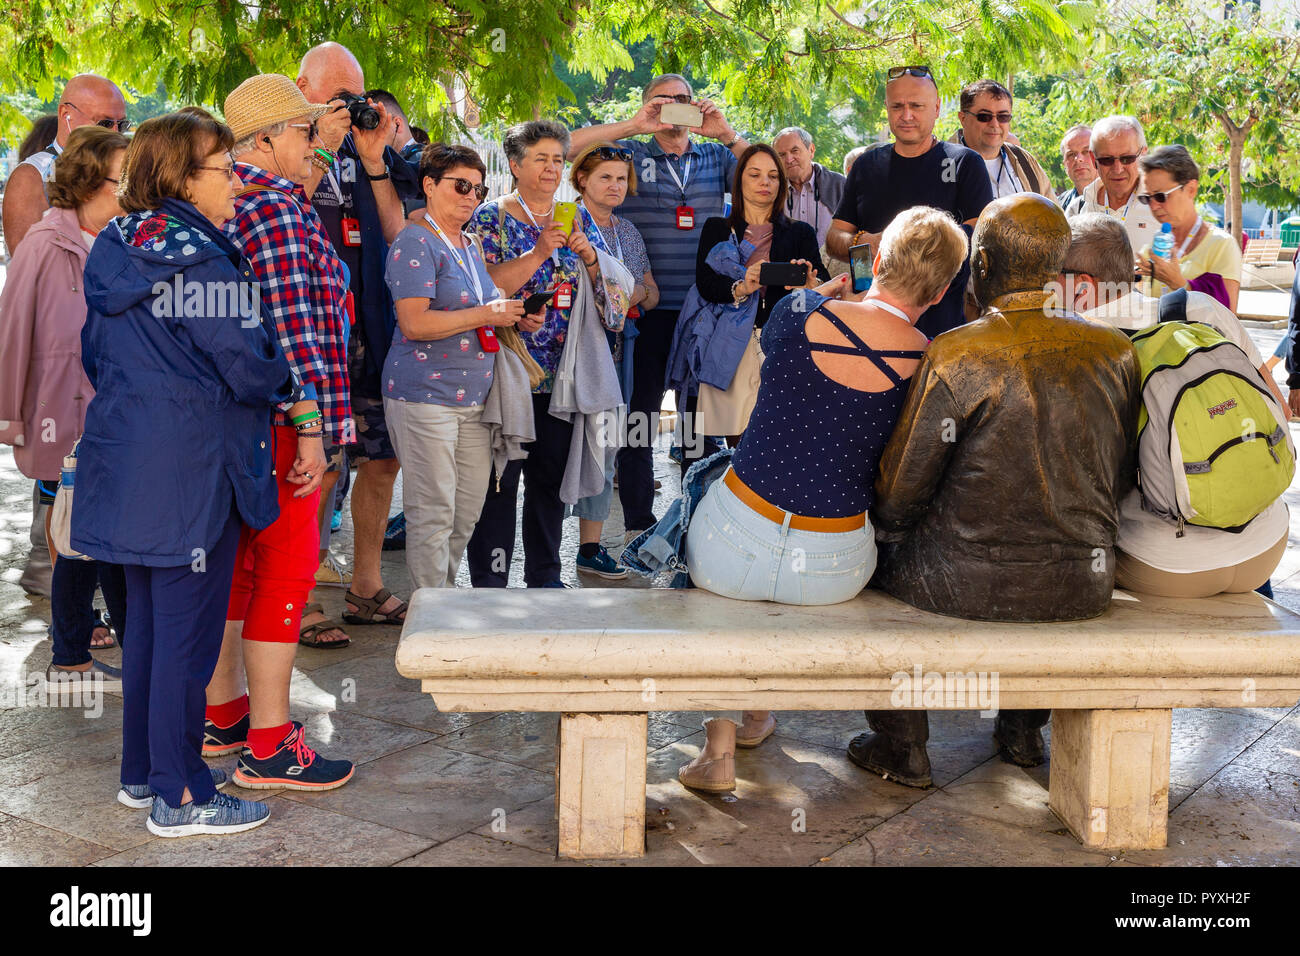 Tour group taking photos at Pablo Picasso statue in Plaza Merced, Malaga, Andalusia, Spain Stock Photo